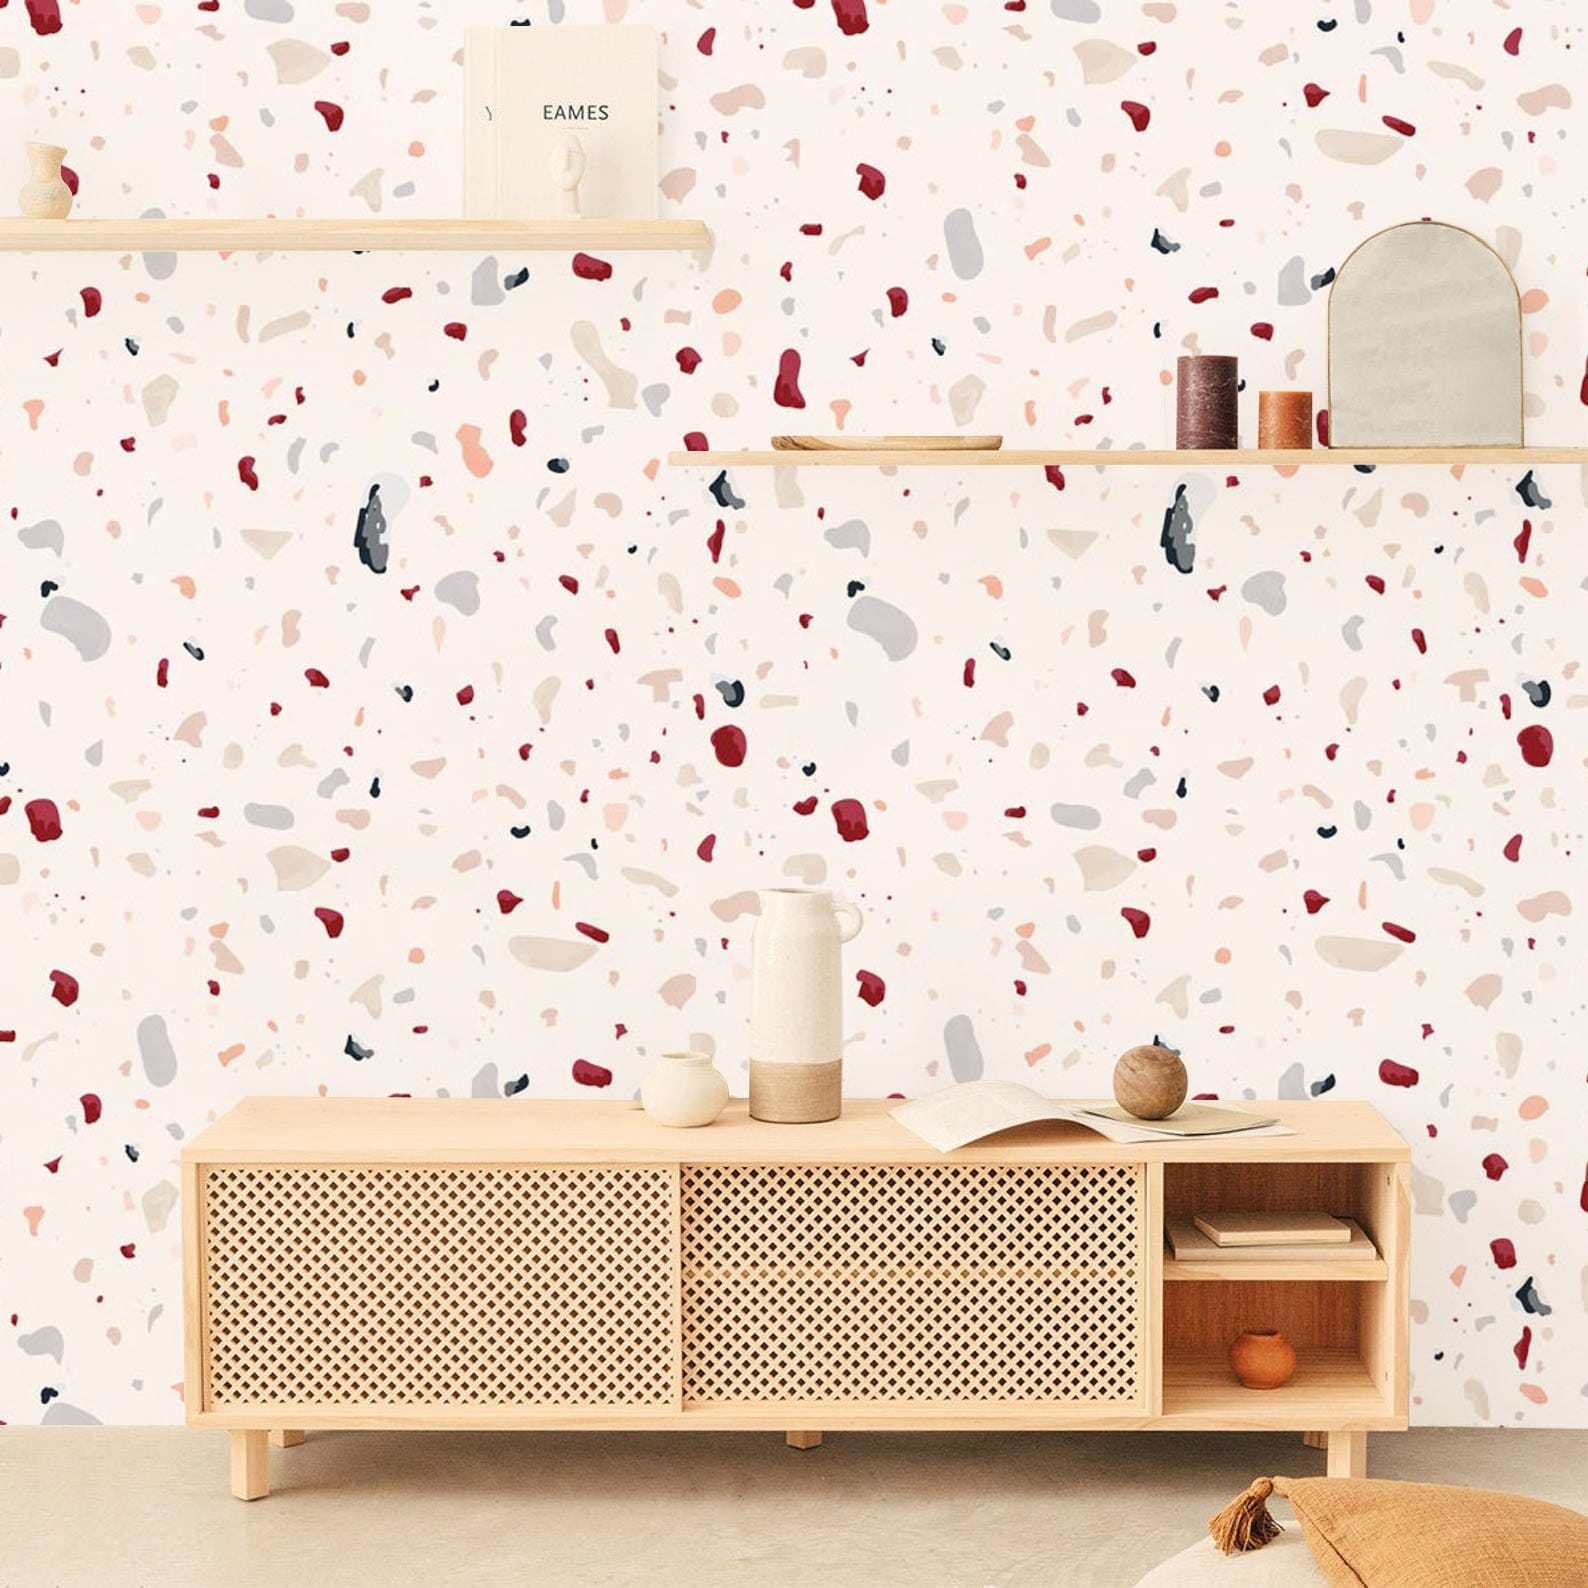 Dot and Marble Wallpaper Mural for the Decoration of the Living Room